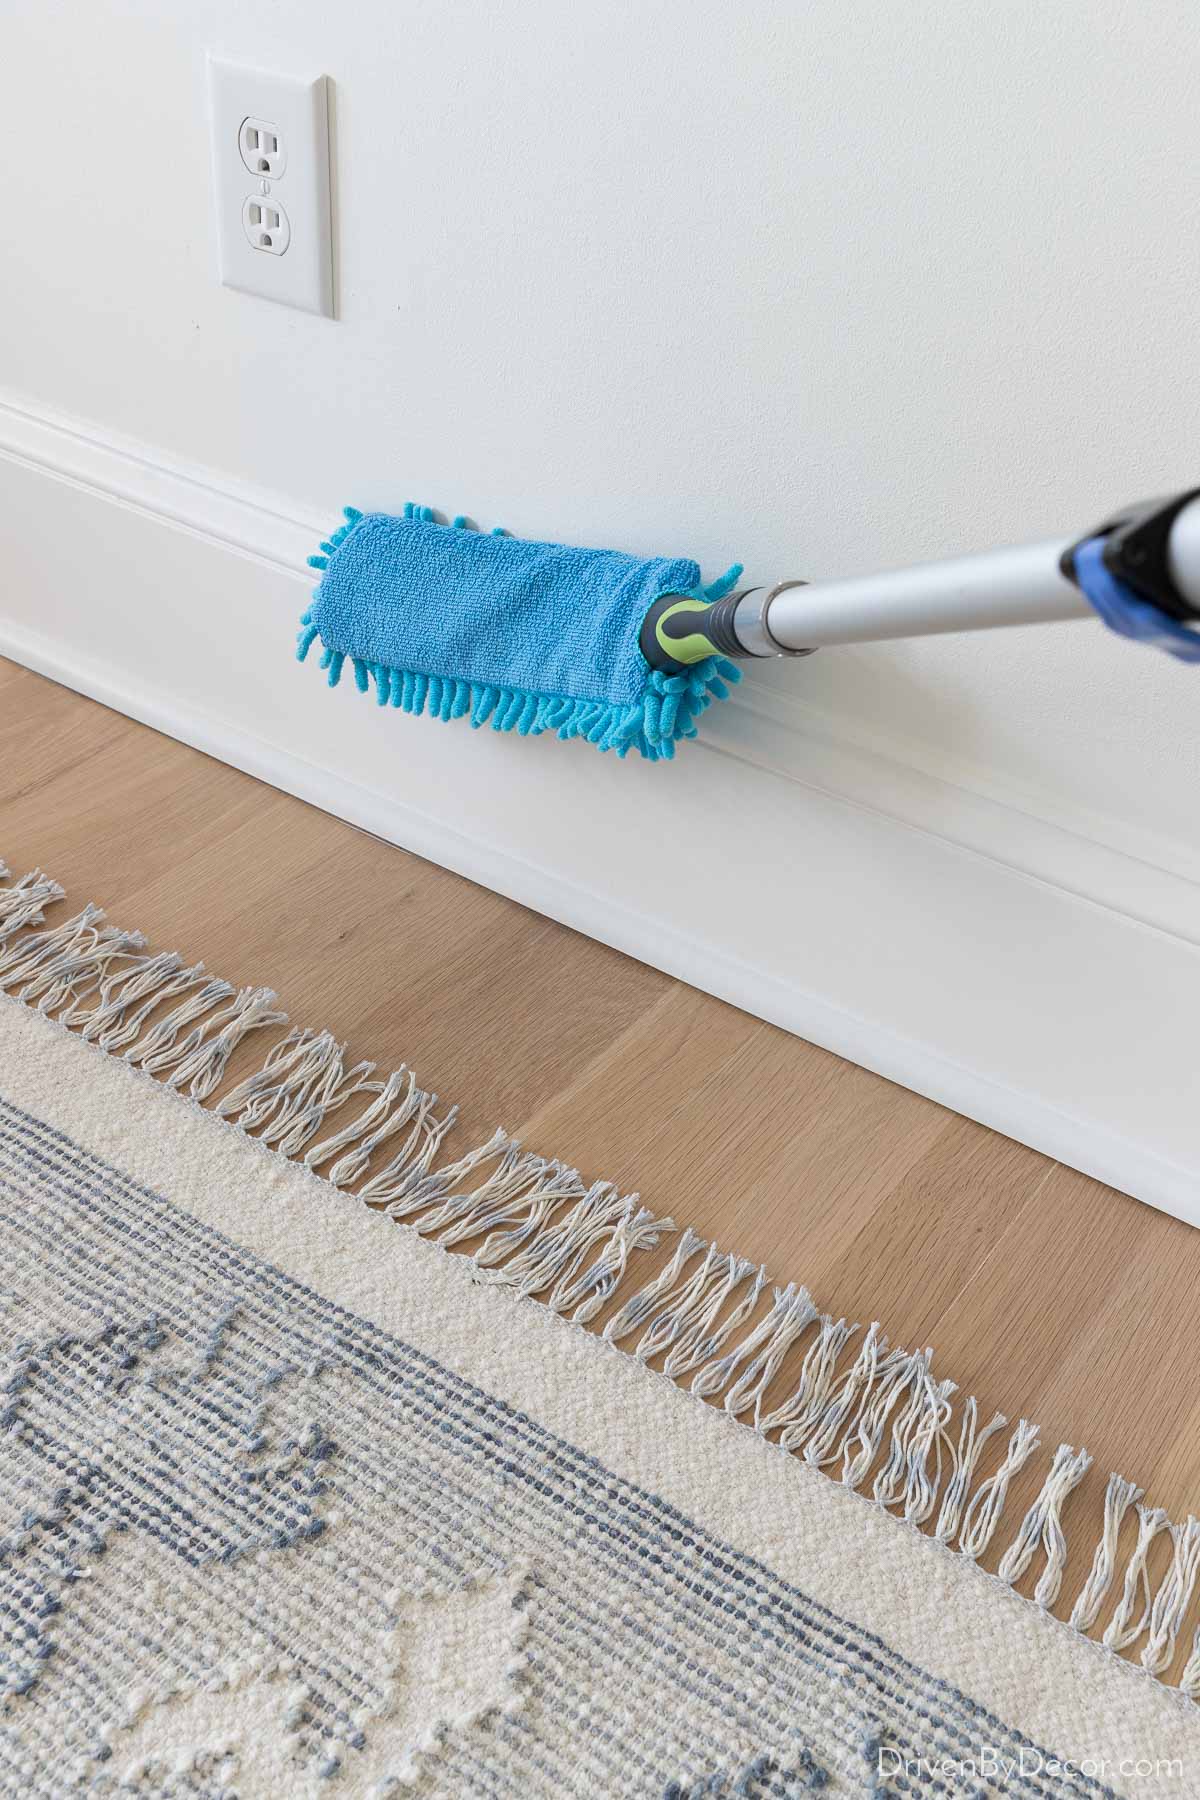 https://www.drivenbydecor.com/wp-content/uploads/2022/03/cleaning-tools-dusting-baseboards.jpg